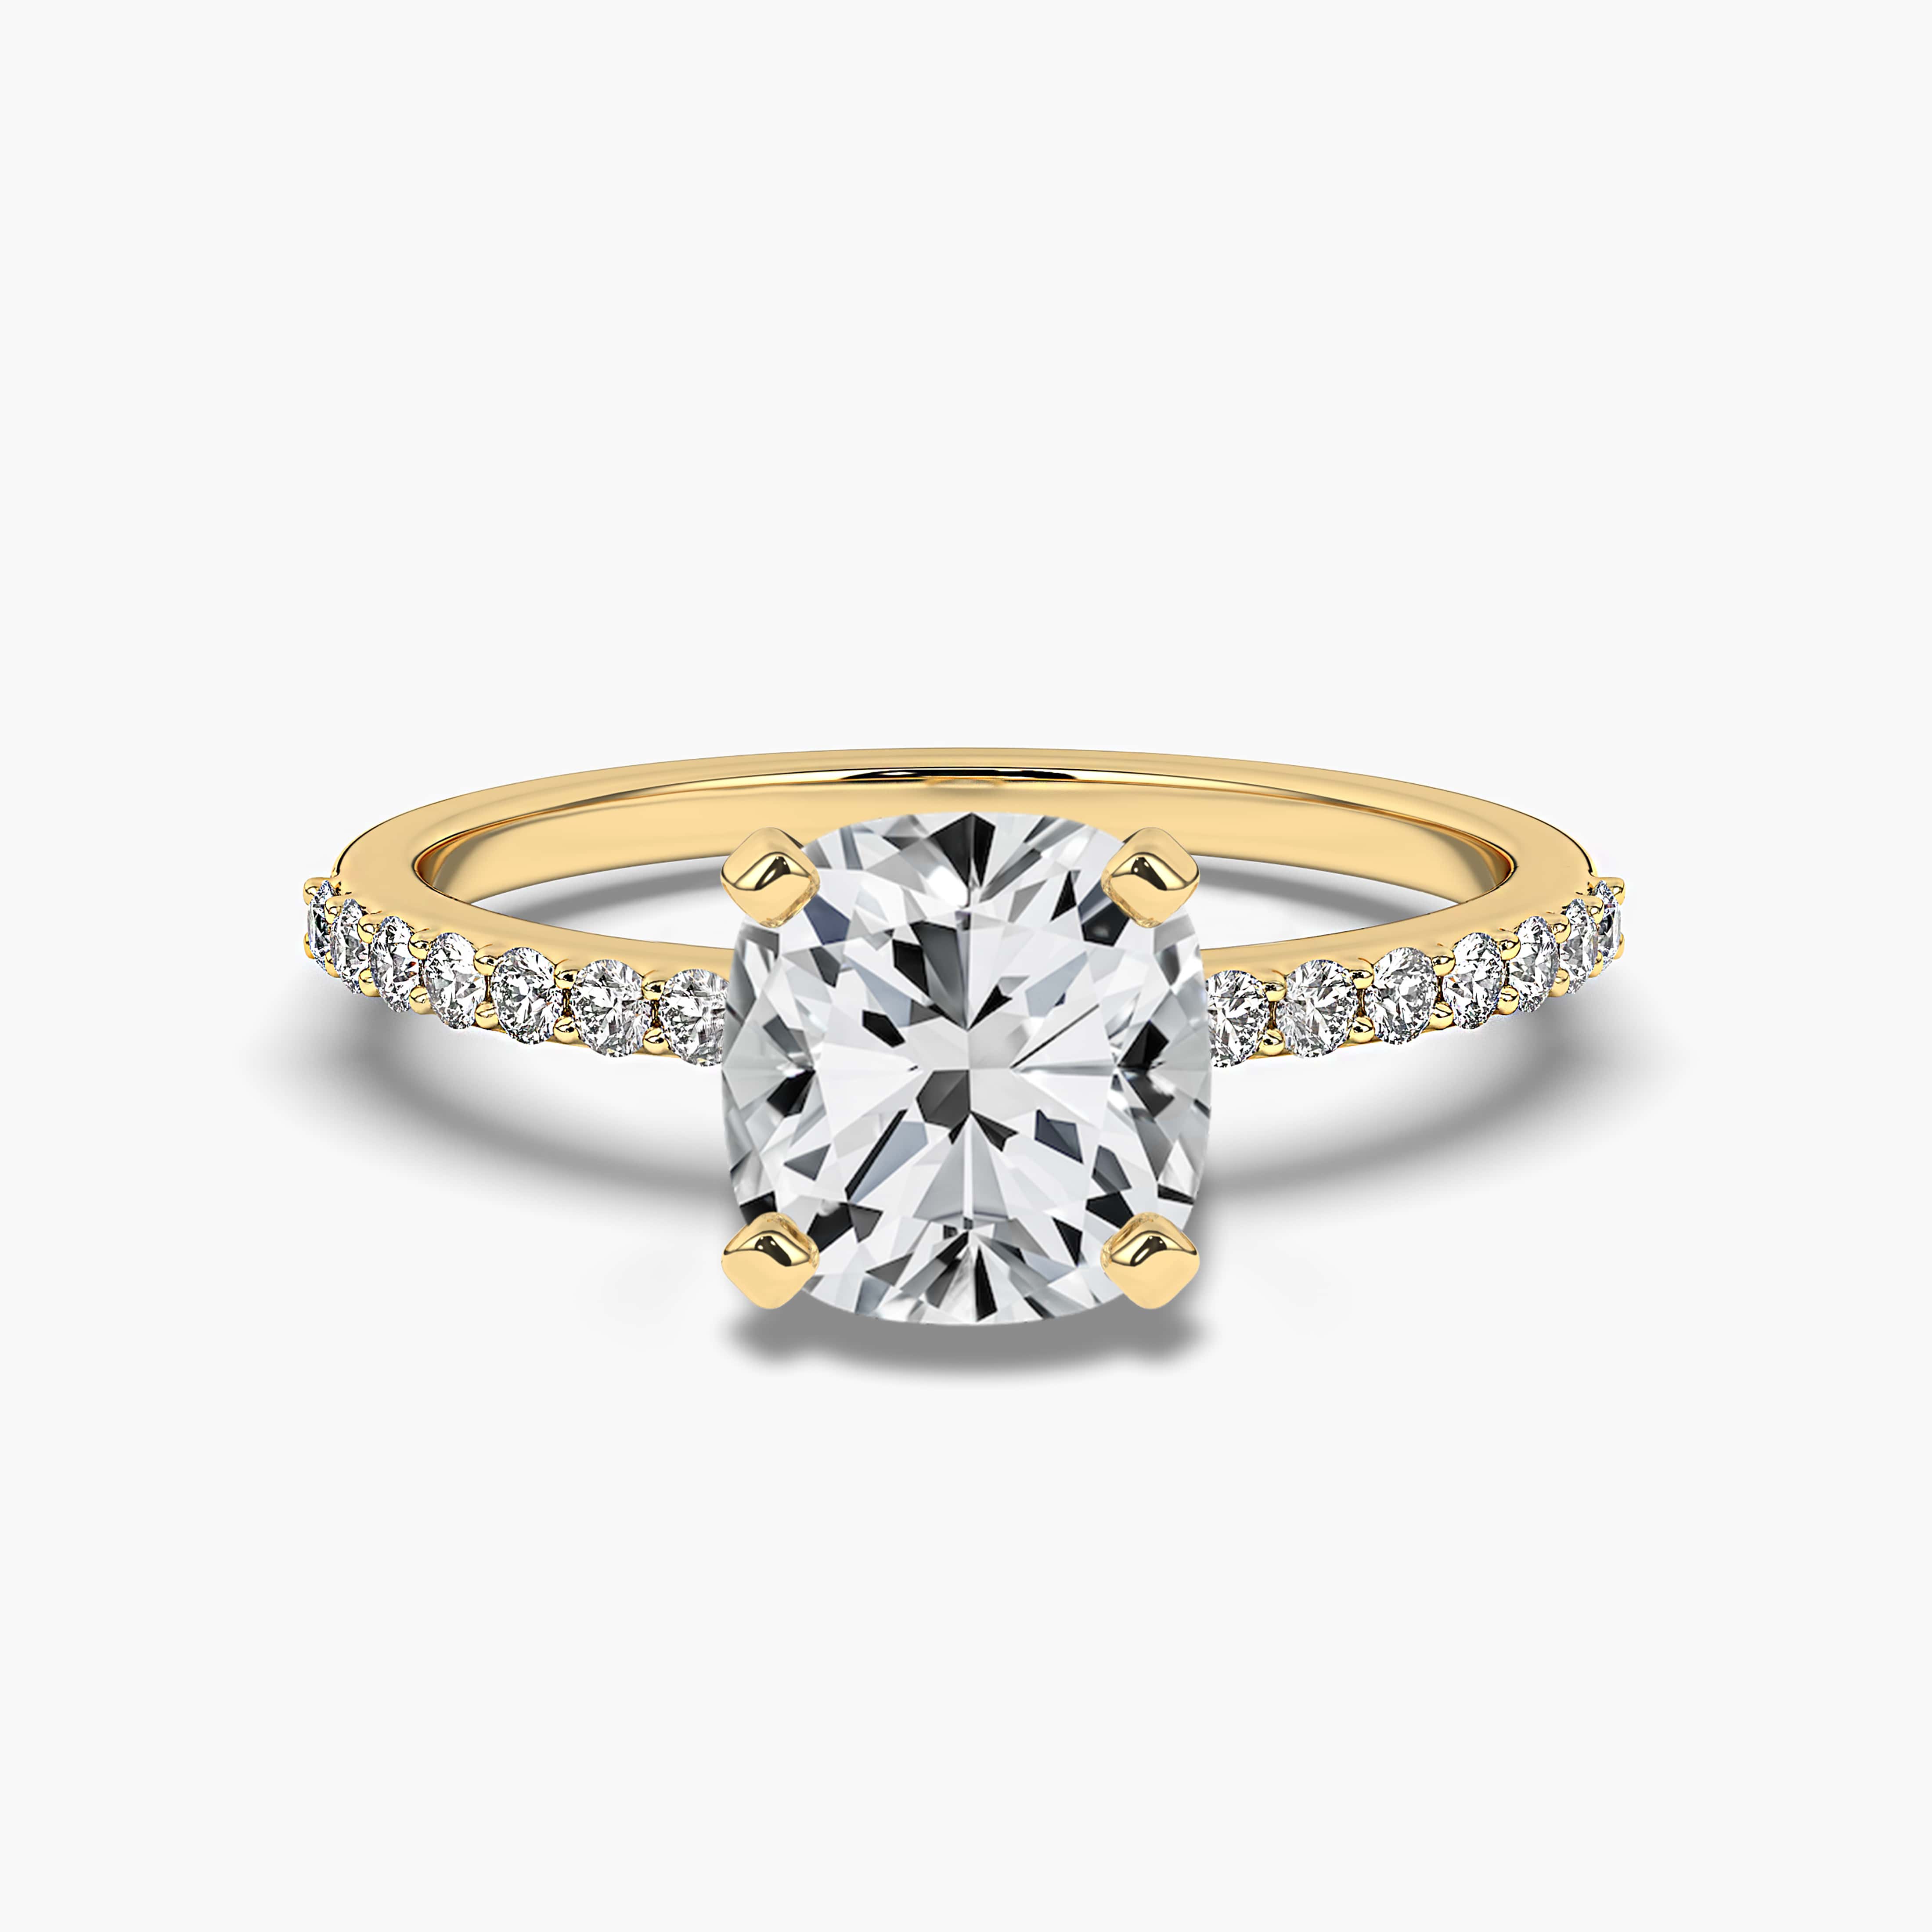 Cushion cut engagement ring Yellow Gold wedding ring Anniversary gift for women 